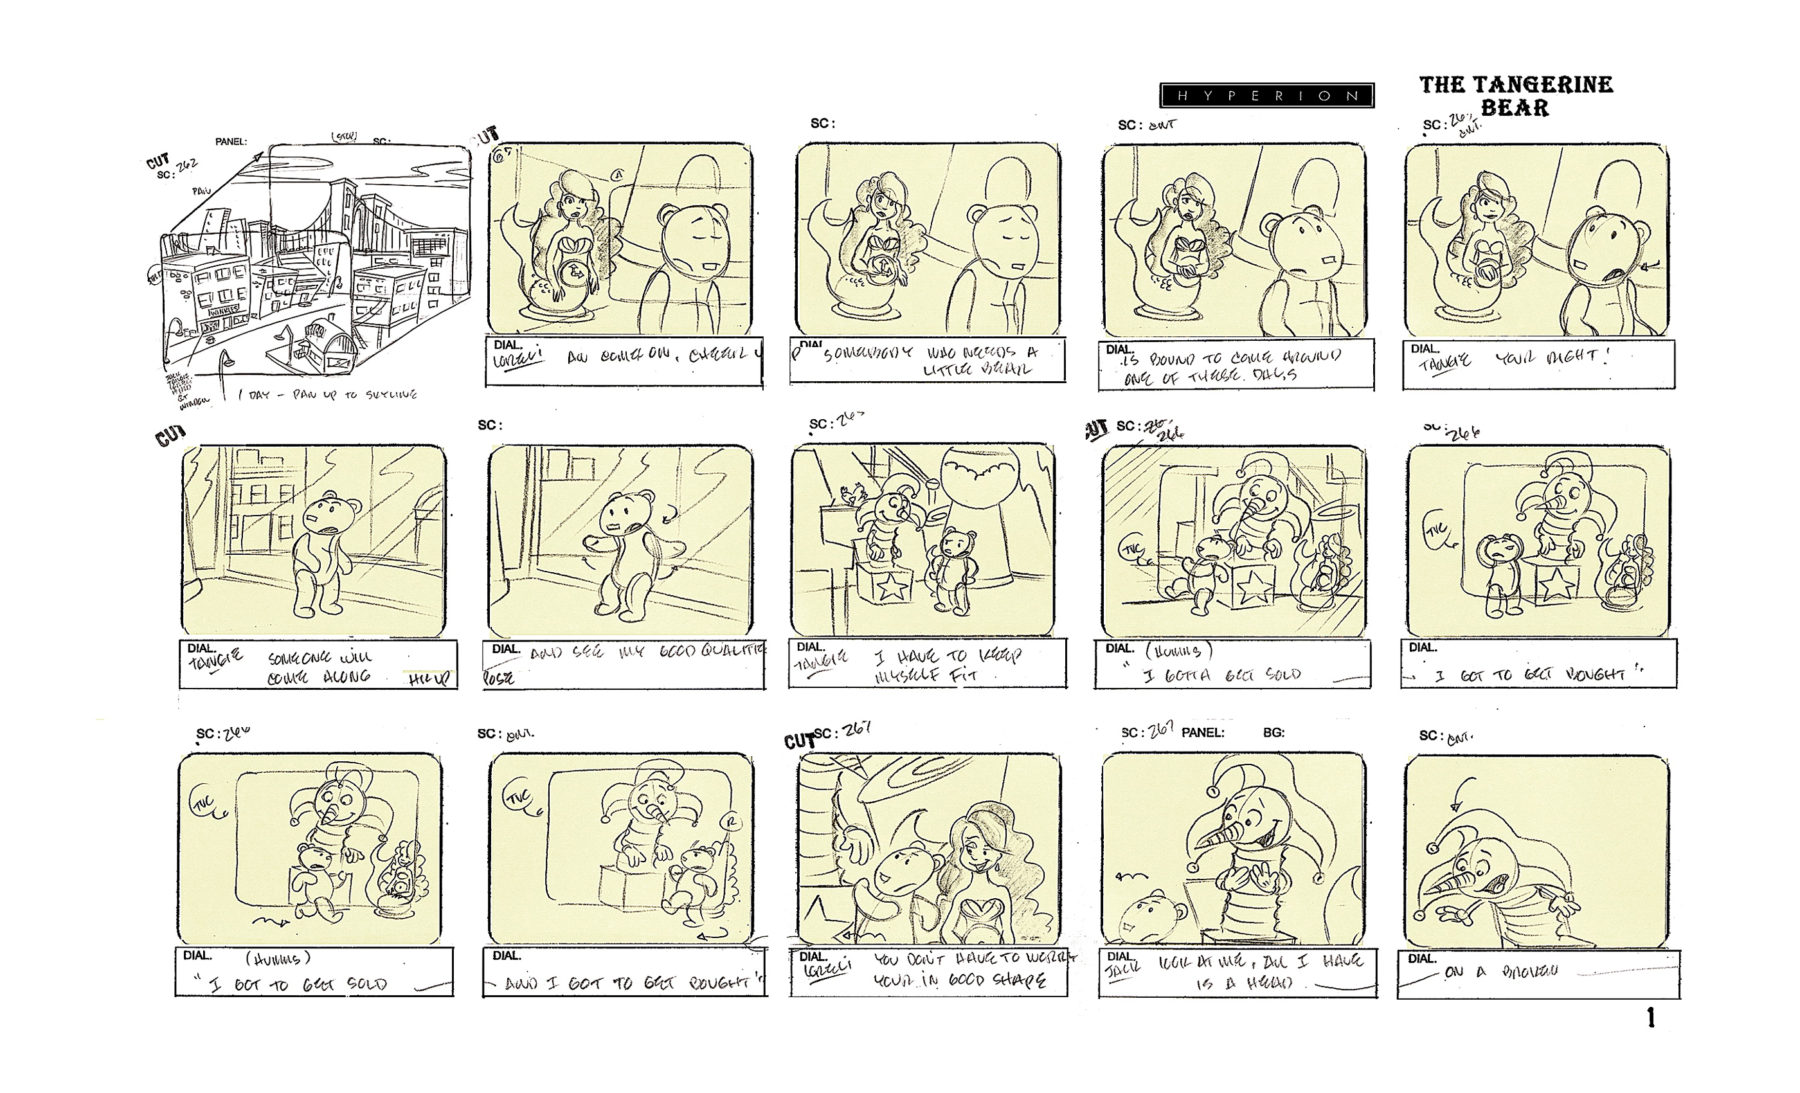 Storyboards, by Director Bert Ring, for The Tangerine Bear "Home in Time for Christmas" Television Special and DVD. Hyperion Studios | Artisan Entertainment